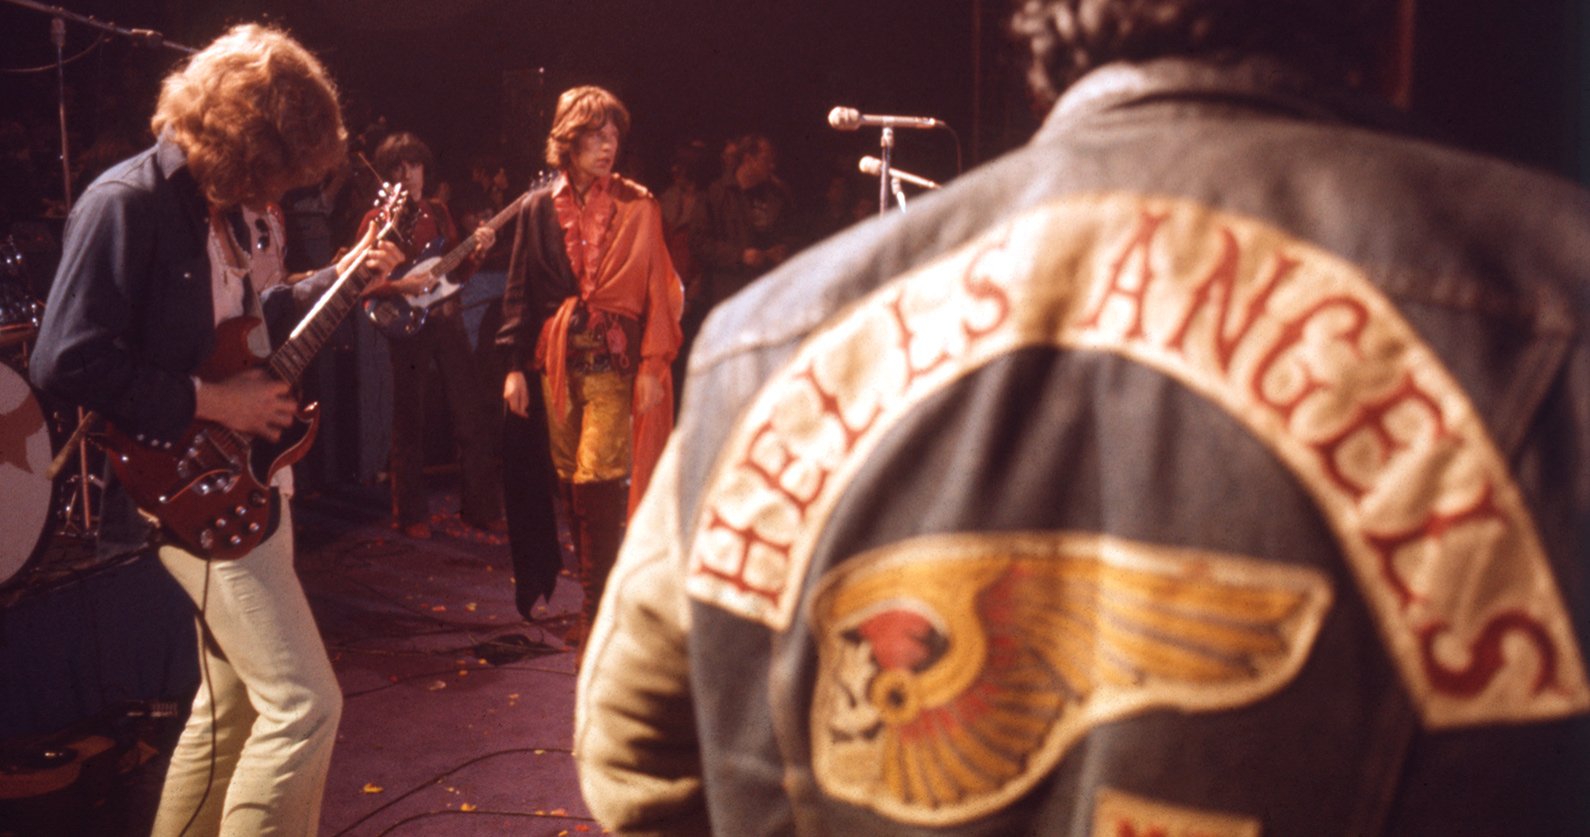 50 years ago the Rolling Stones headlined a ‘West Coast Woodstock.’ Altamont ended the ’60s with chaos and death.